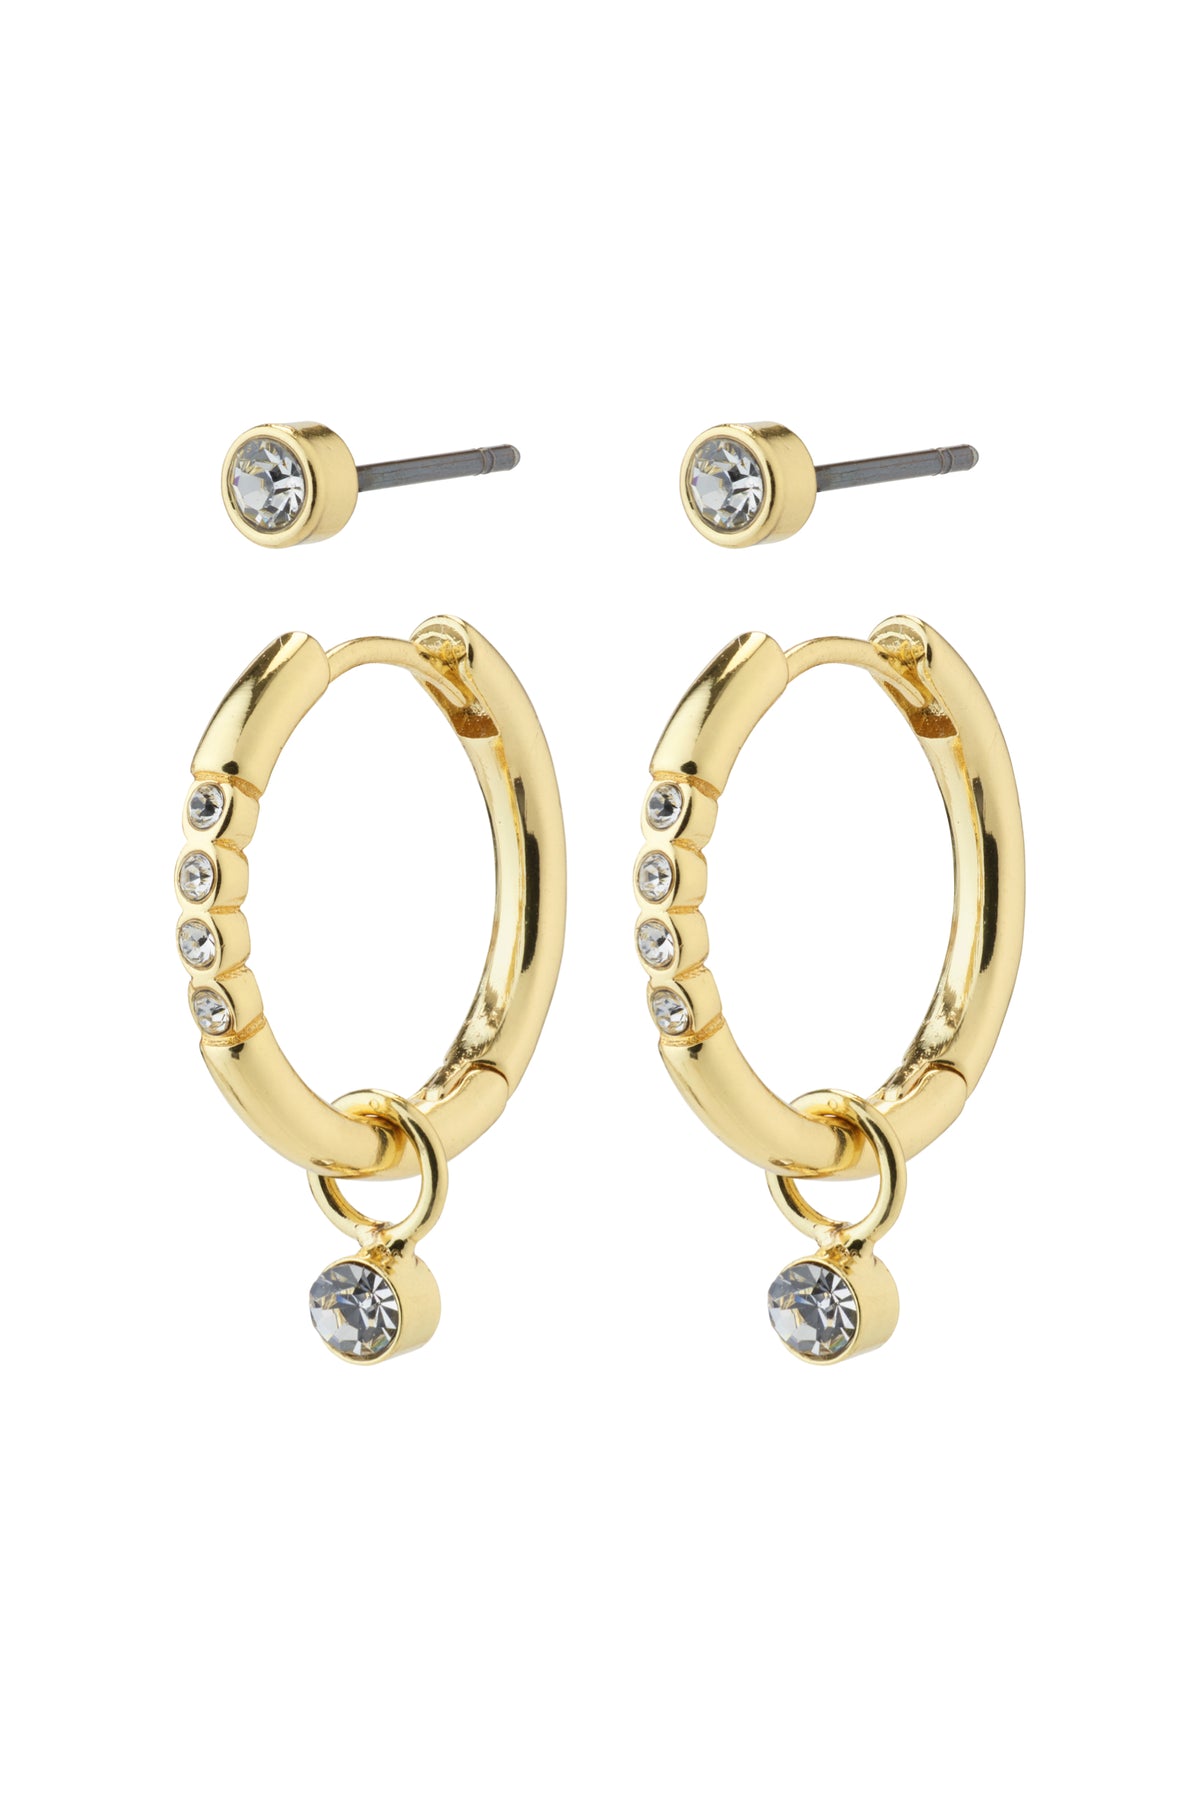 Elna Recycled Crystal Earrings 2 in 1 Set - Gold Plated